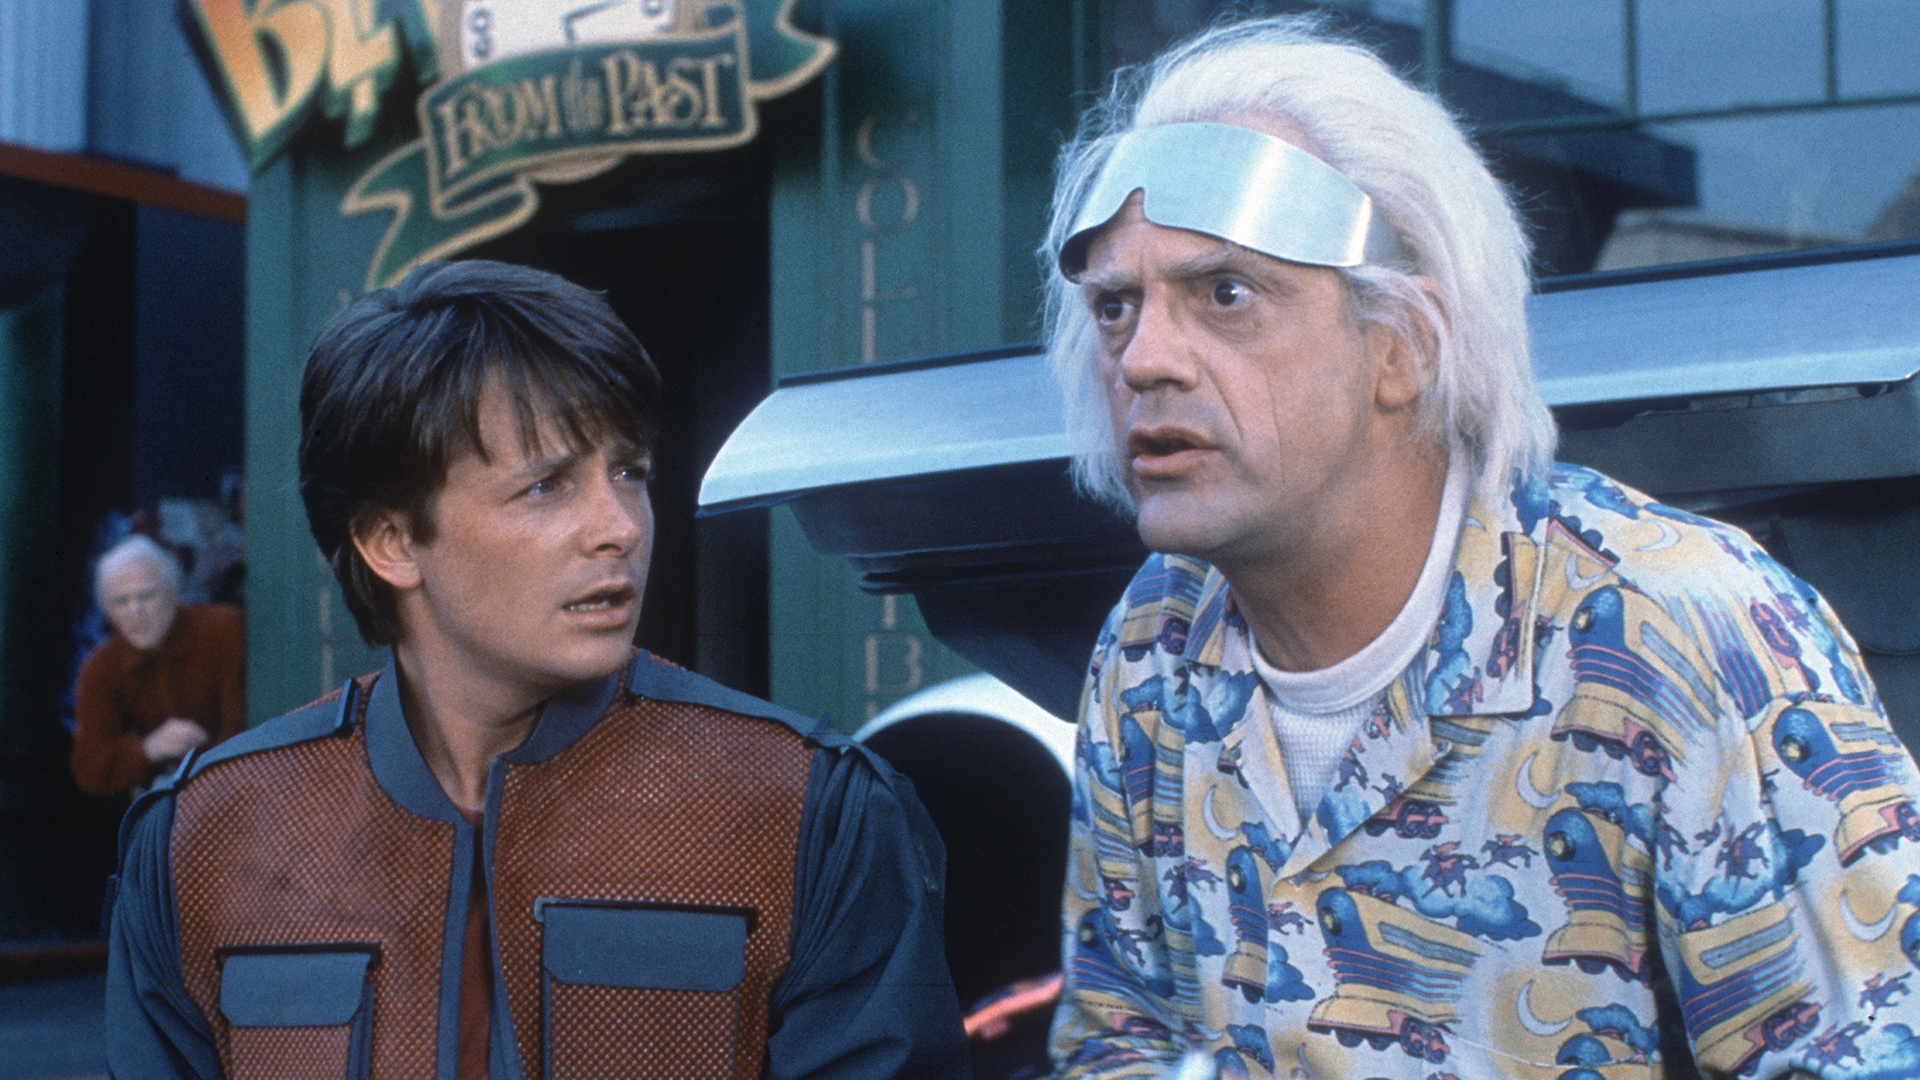 Can We Talk About [Back To The Future]? – did you blank it?